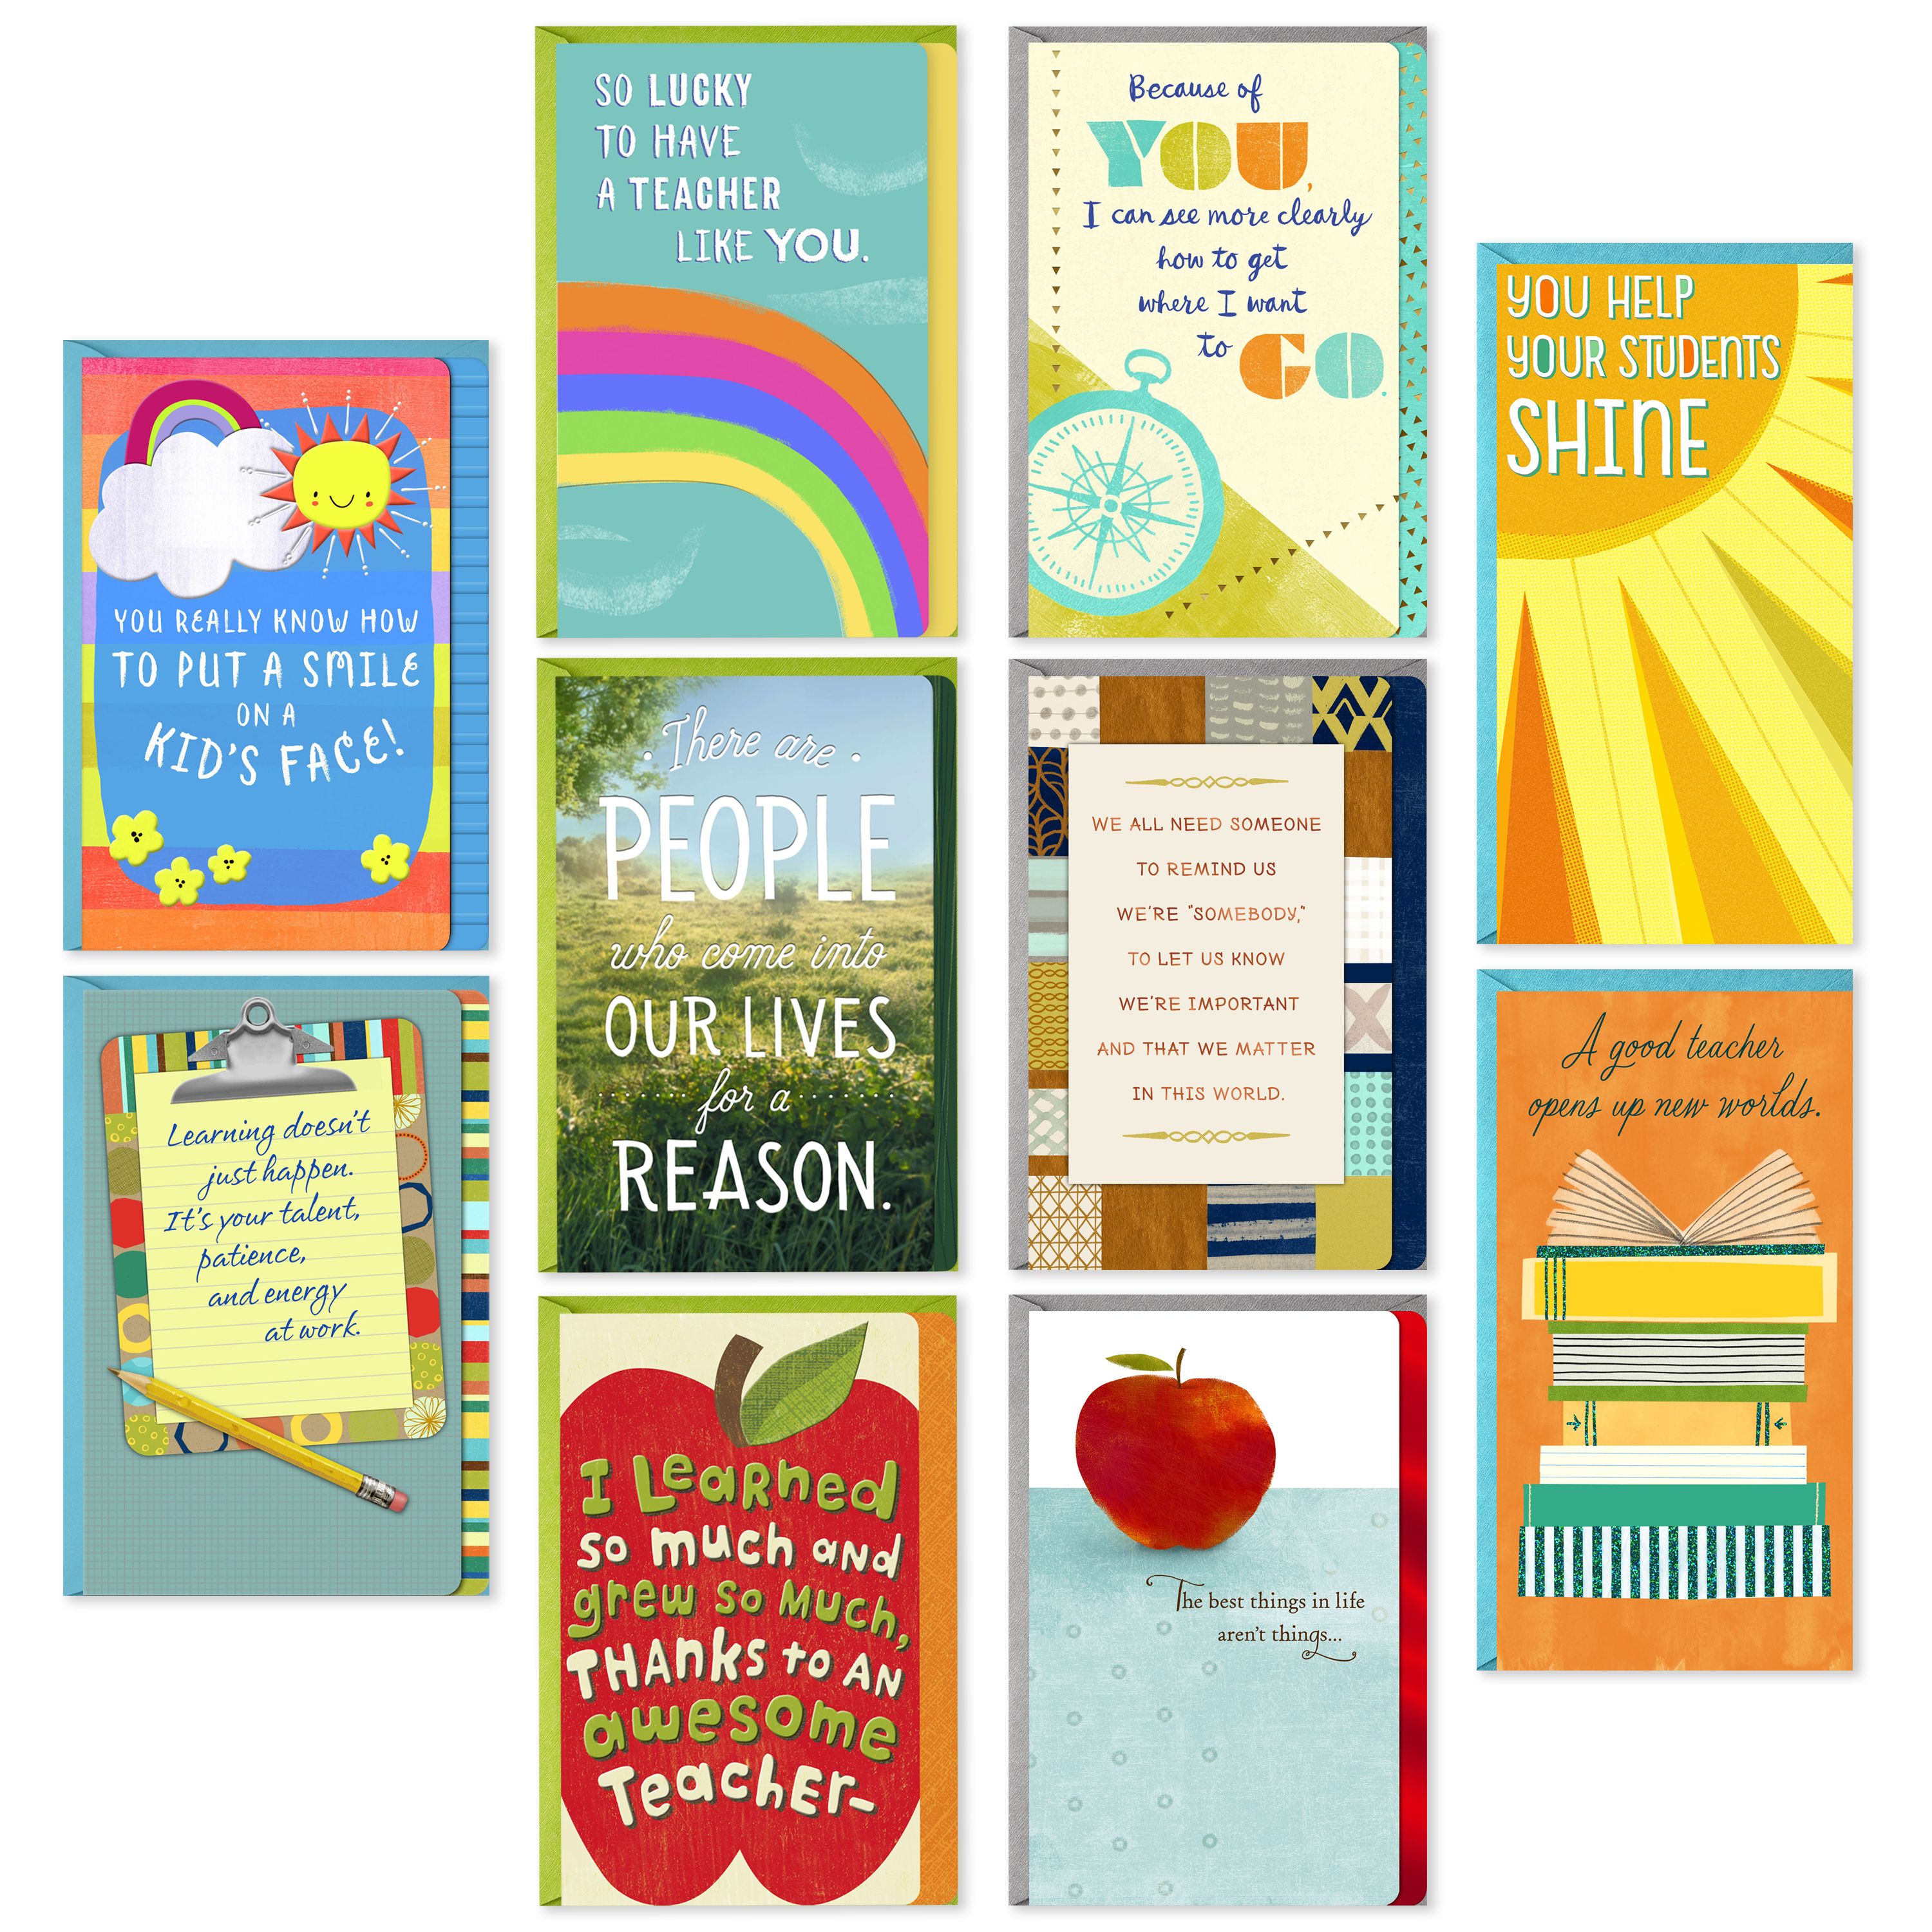 Hallmark Teacher Appreciation Cards Assortment for Preschool, Kindergarten, Elementary School, Graduation or Back to School (10 Cards and Gift Card Holders with Envelopes) - image 1 of 11